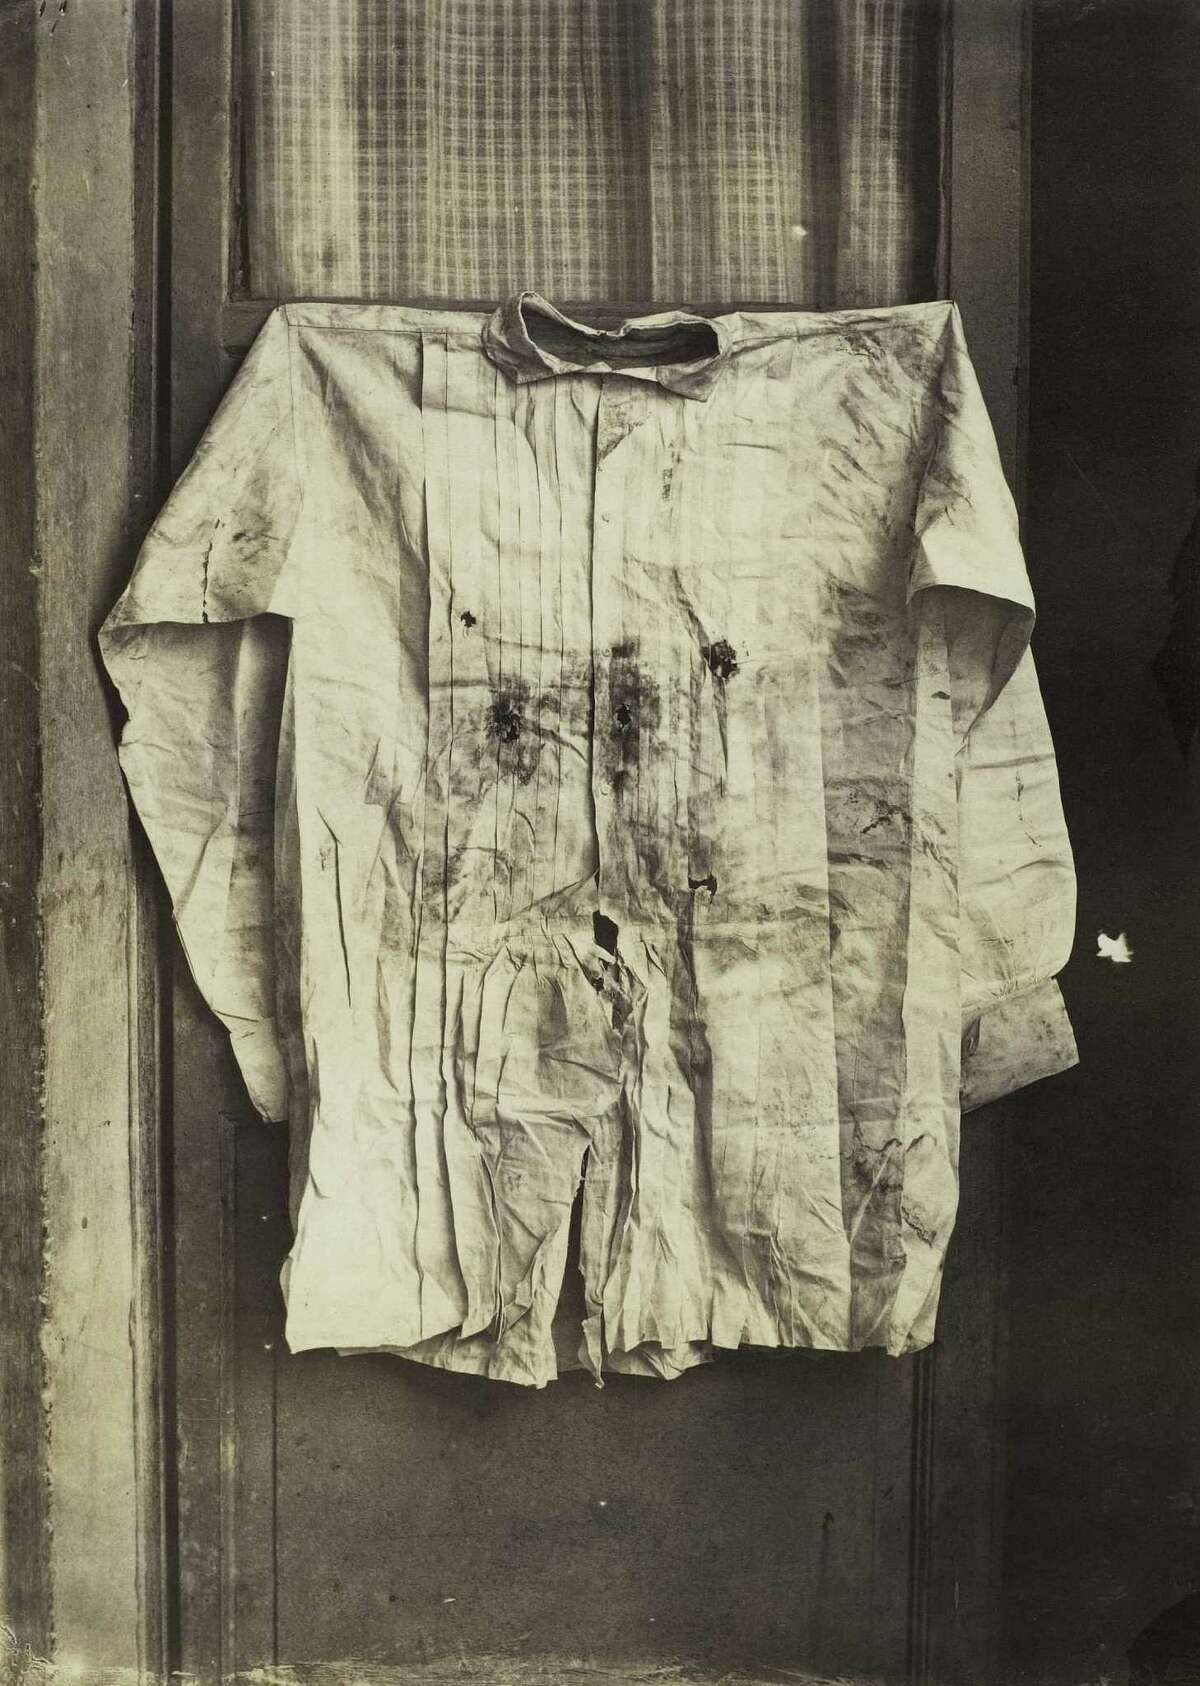 From "WAR/PHOTOGRAPHY: Photographs of Armed Conflict and Its Aftermath", at the Museum of Fine Arts, Houston Nov. 11 - Feb. 3: Francois Aubert, French, 1829 1906: "The Shirt of the Emperor, Worn during His Execution", Mexico, 1867, Albumen print, The Metropolitan Museum of Art, Gilman Collection, Gift of The Howard Gilman Foundation, 2005 Image copyright The Metropolitan Museum of Art. Image source: Art Resource, NY